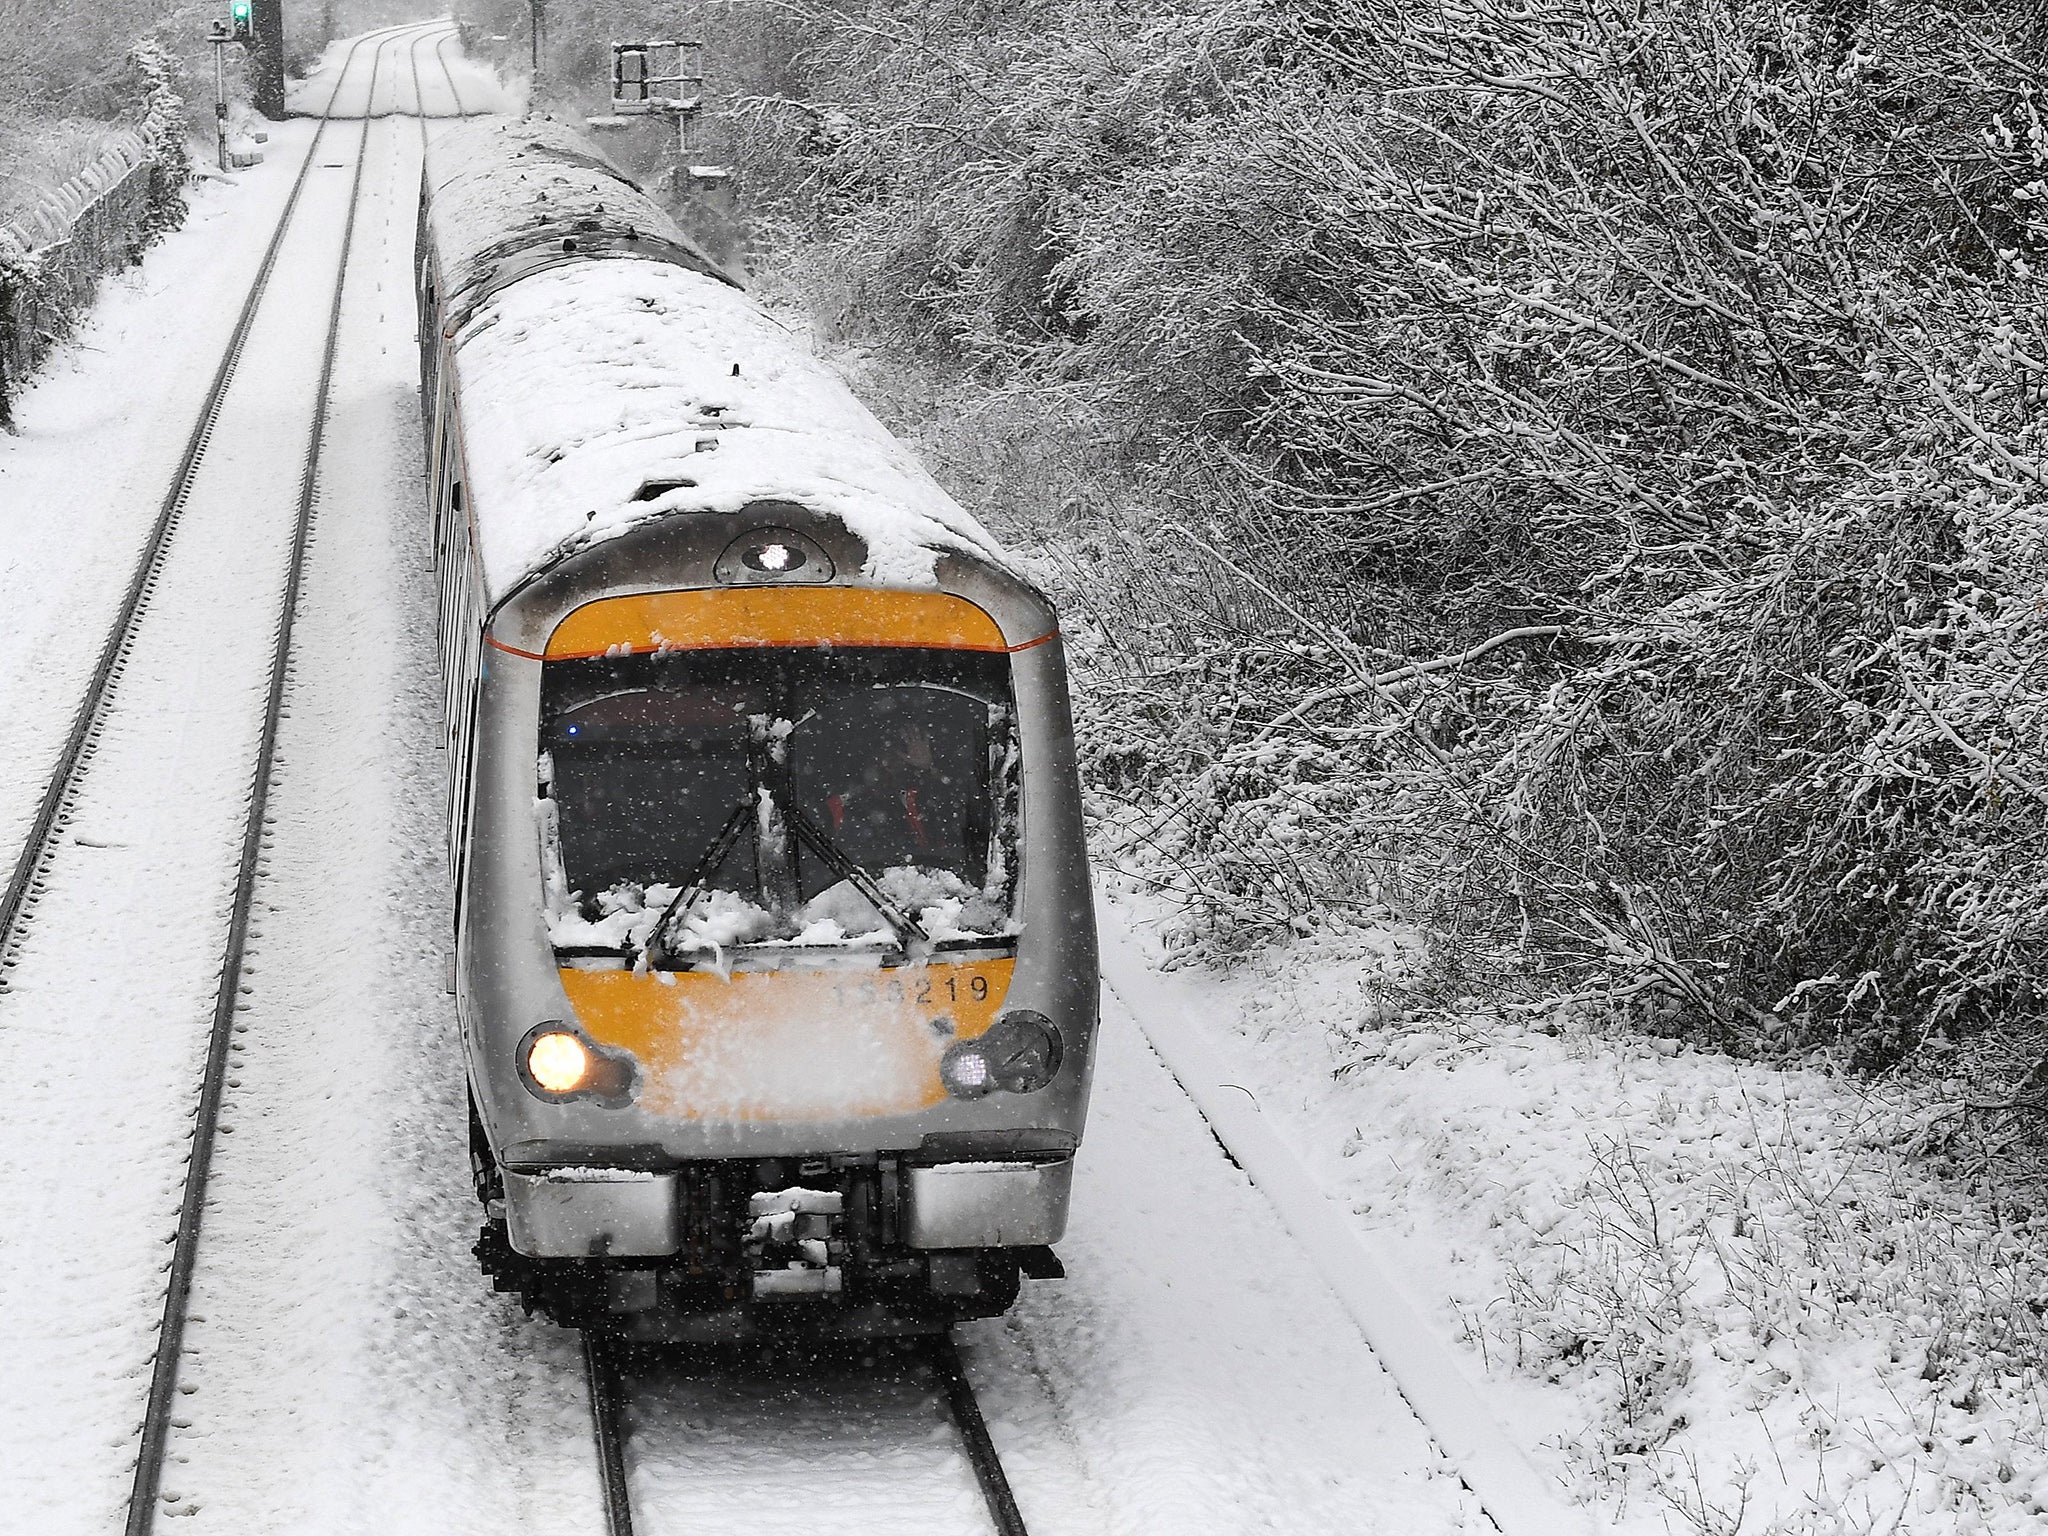 A train travels through snow at High Wycombe, west of London